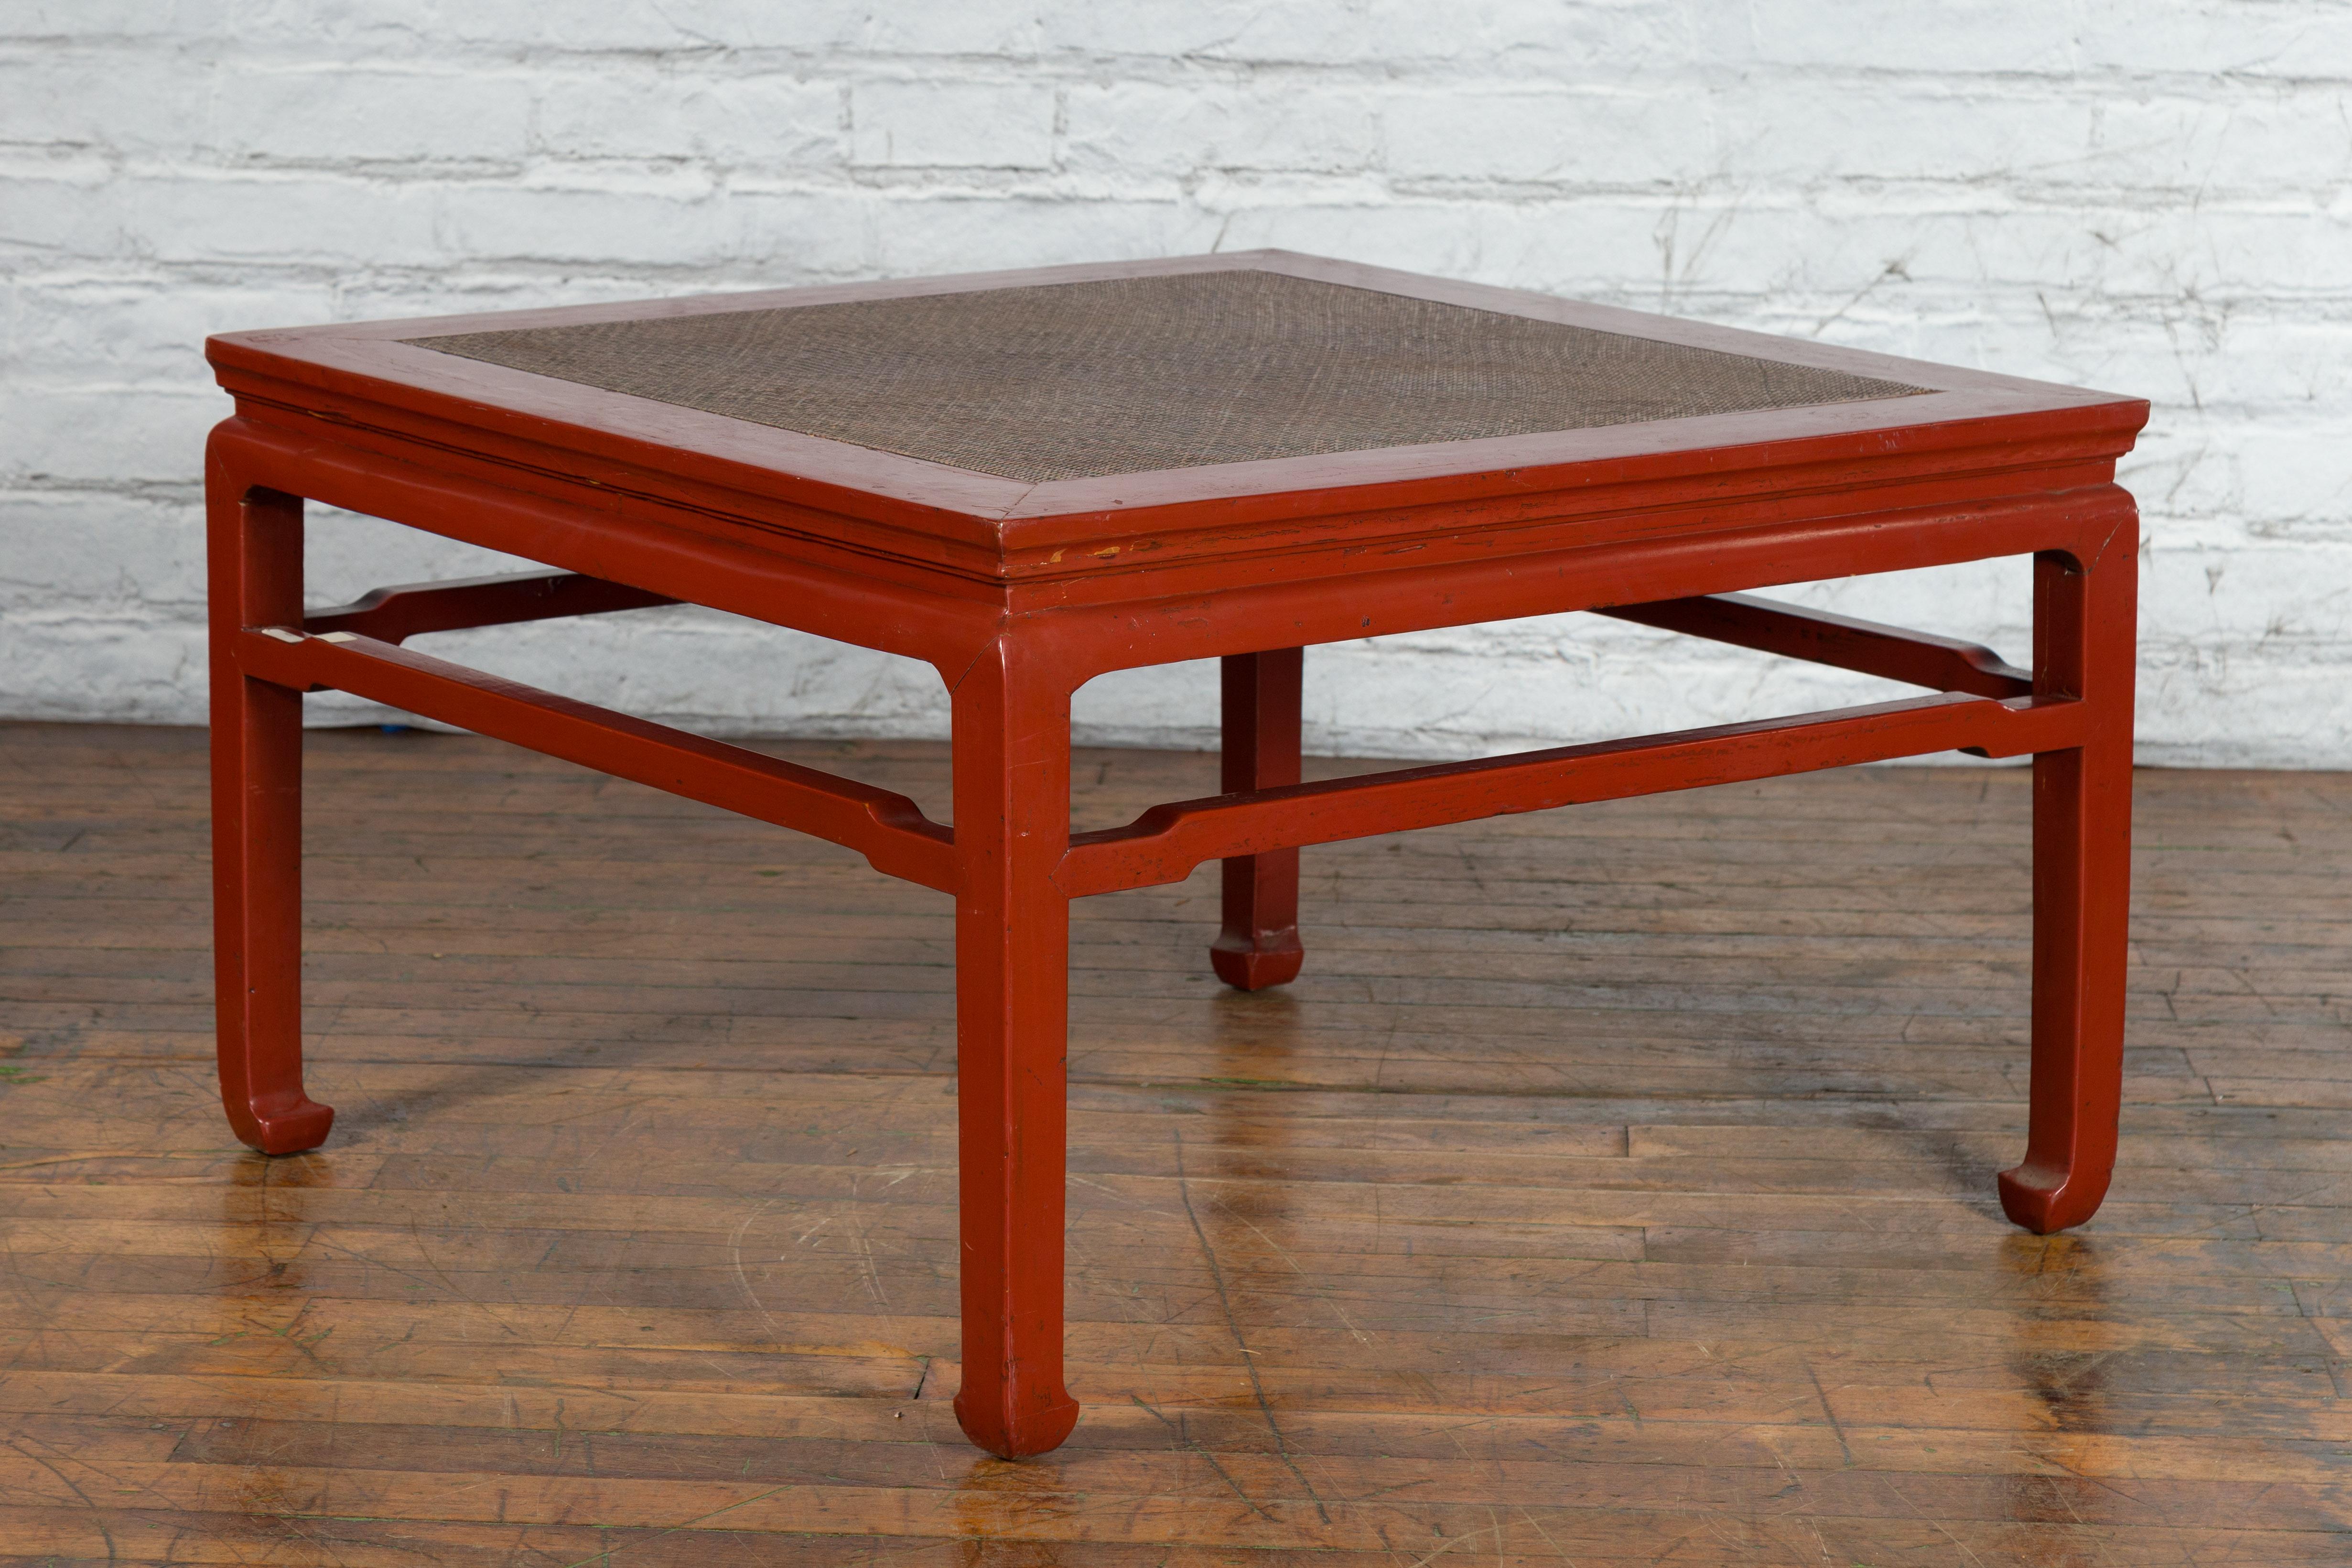 Chinese Early 20th Century Red Lacquer Coffee Table with Hand-Woven Rattan Top For Sale 6